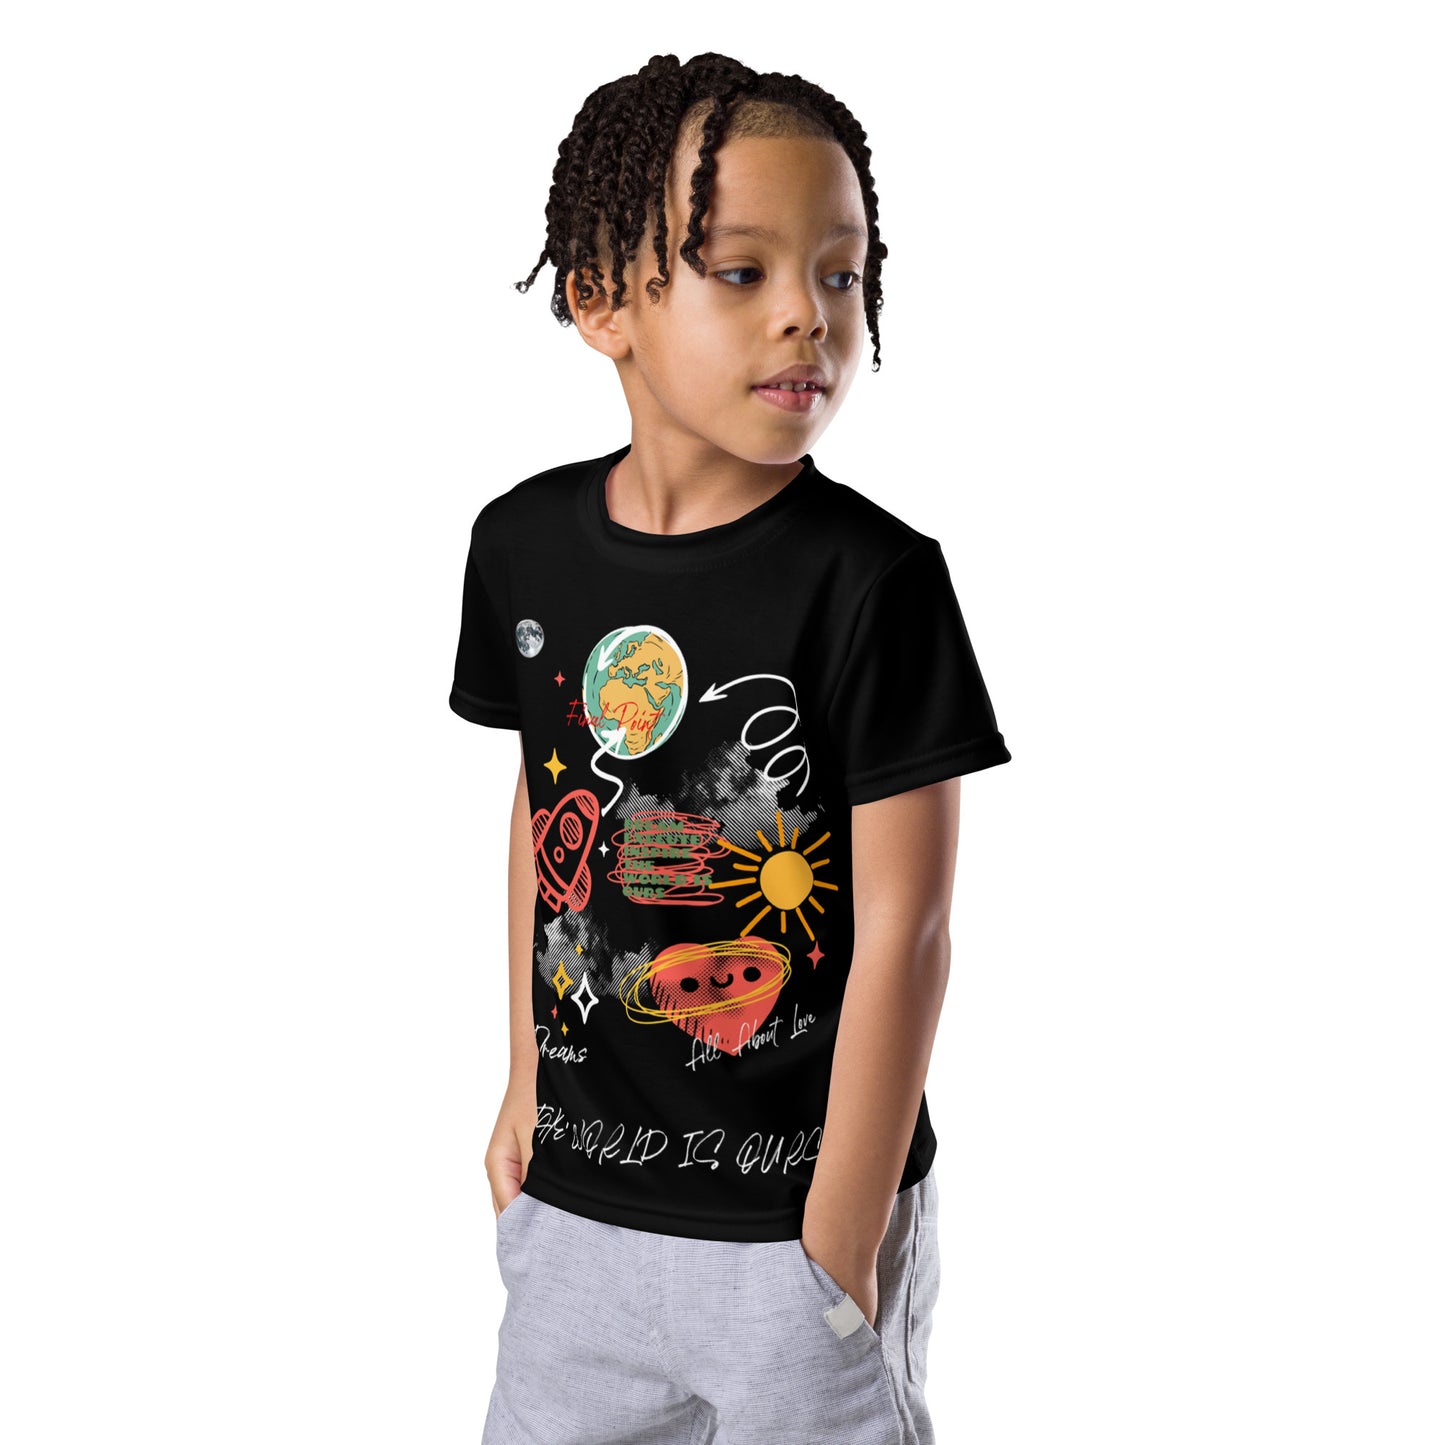 TWIO Scattered Thoughts Kids crew neck t-shirt